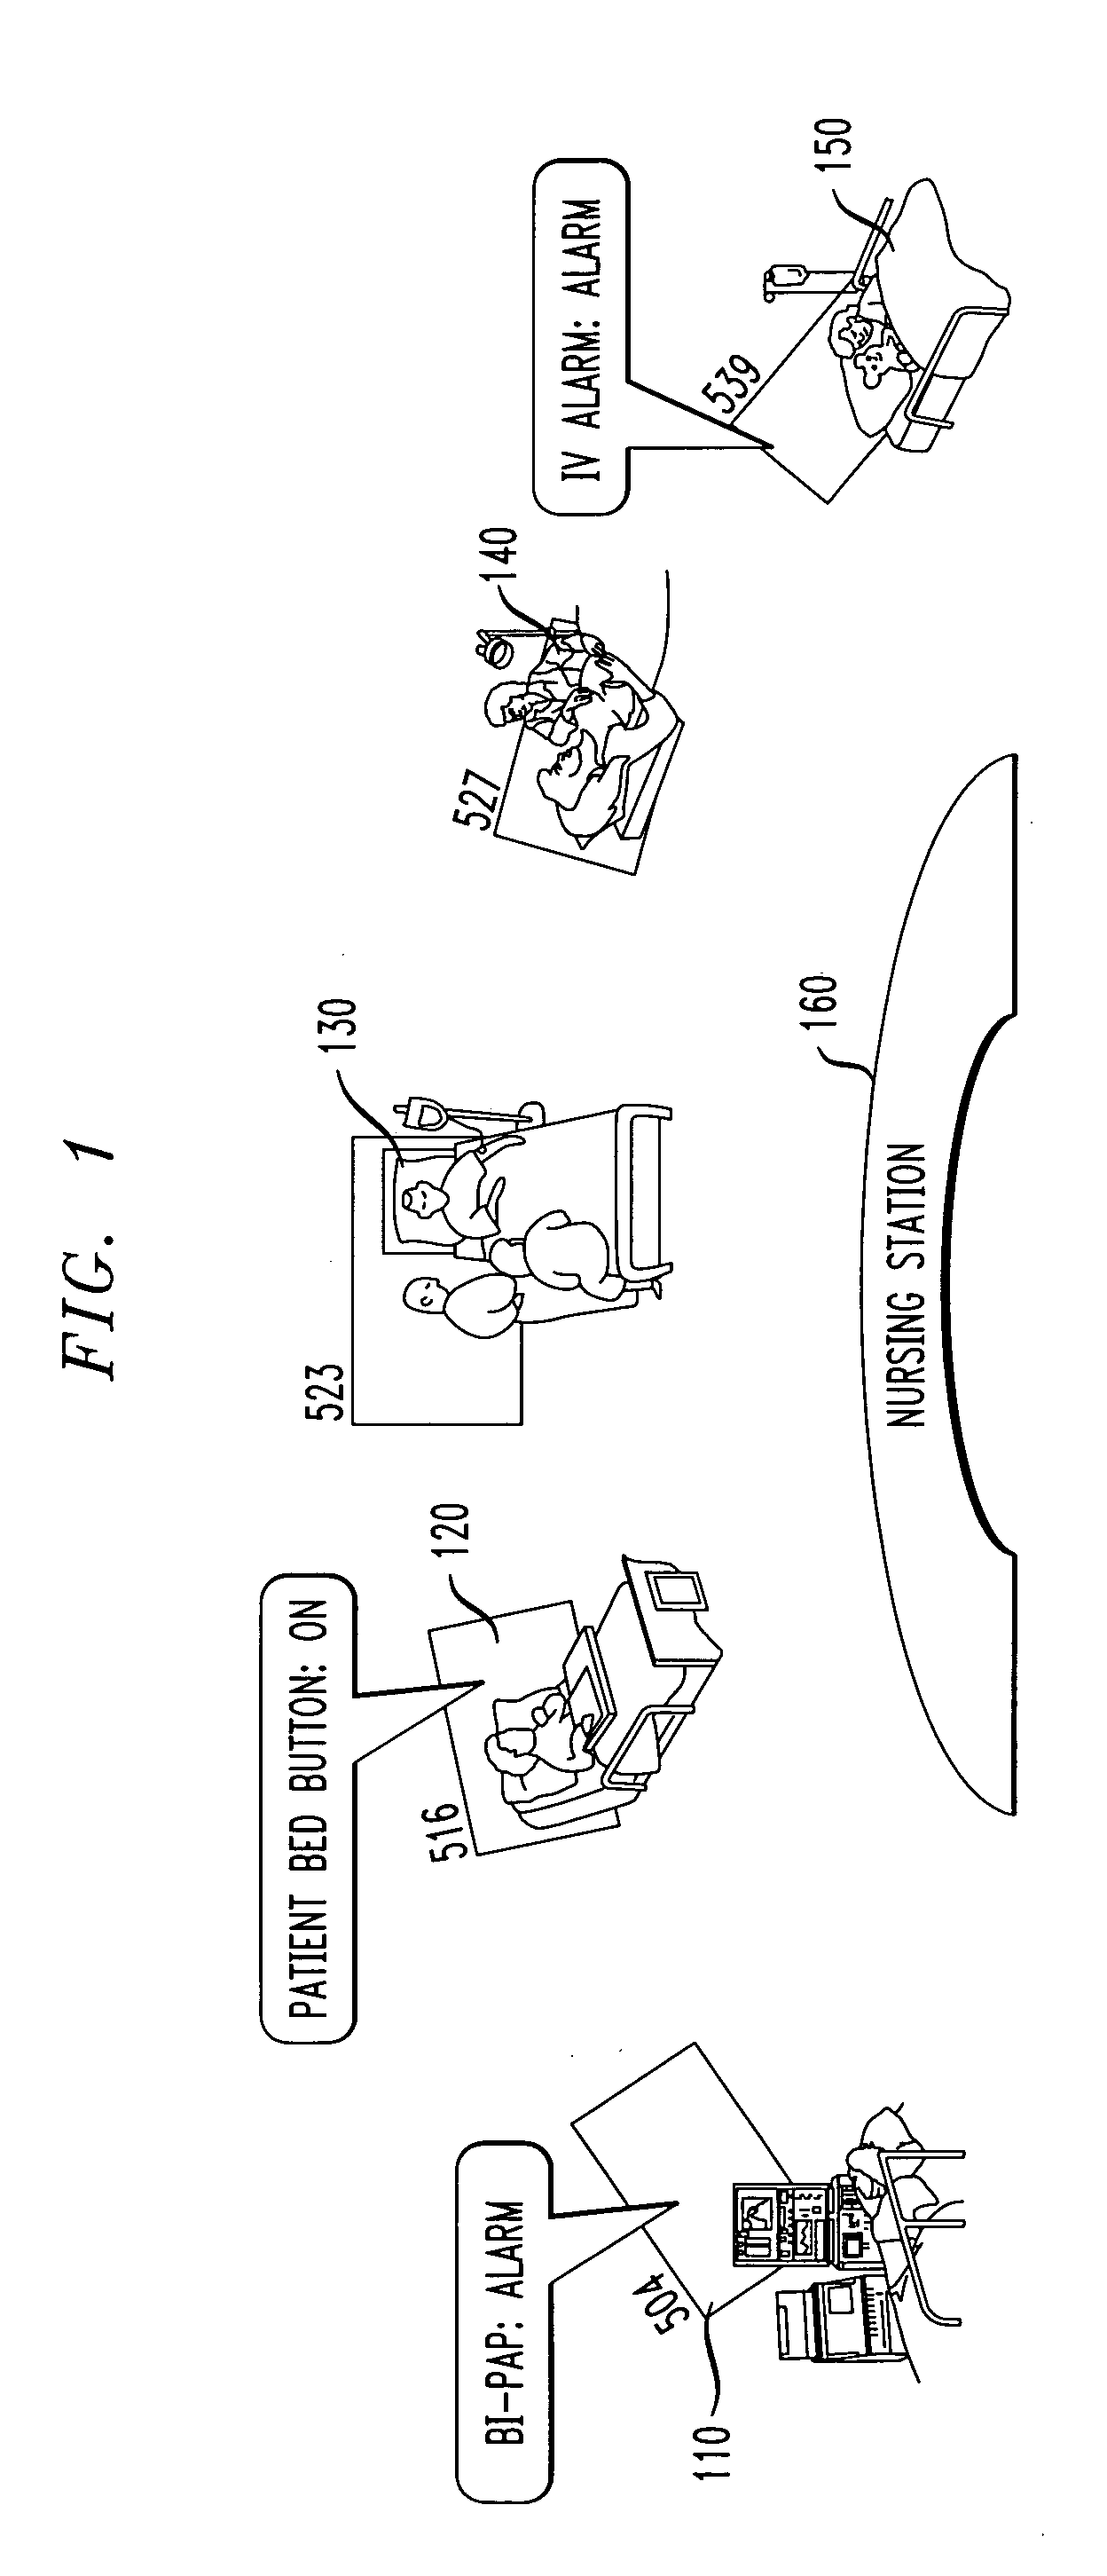 Method and system for patient care triage